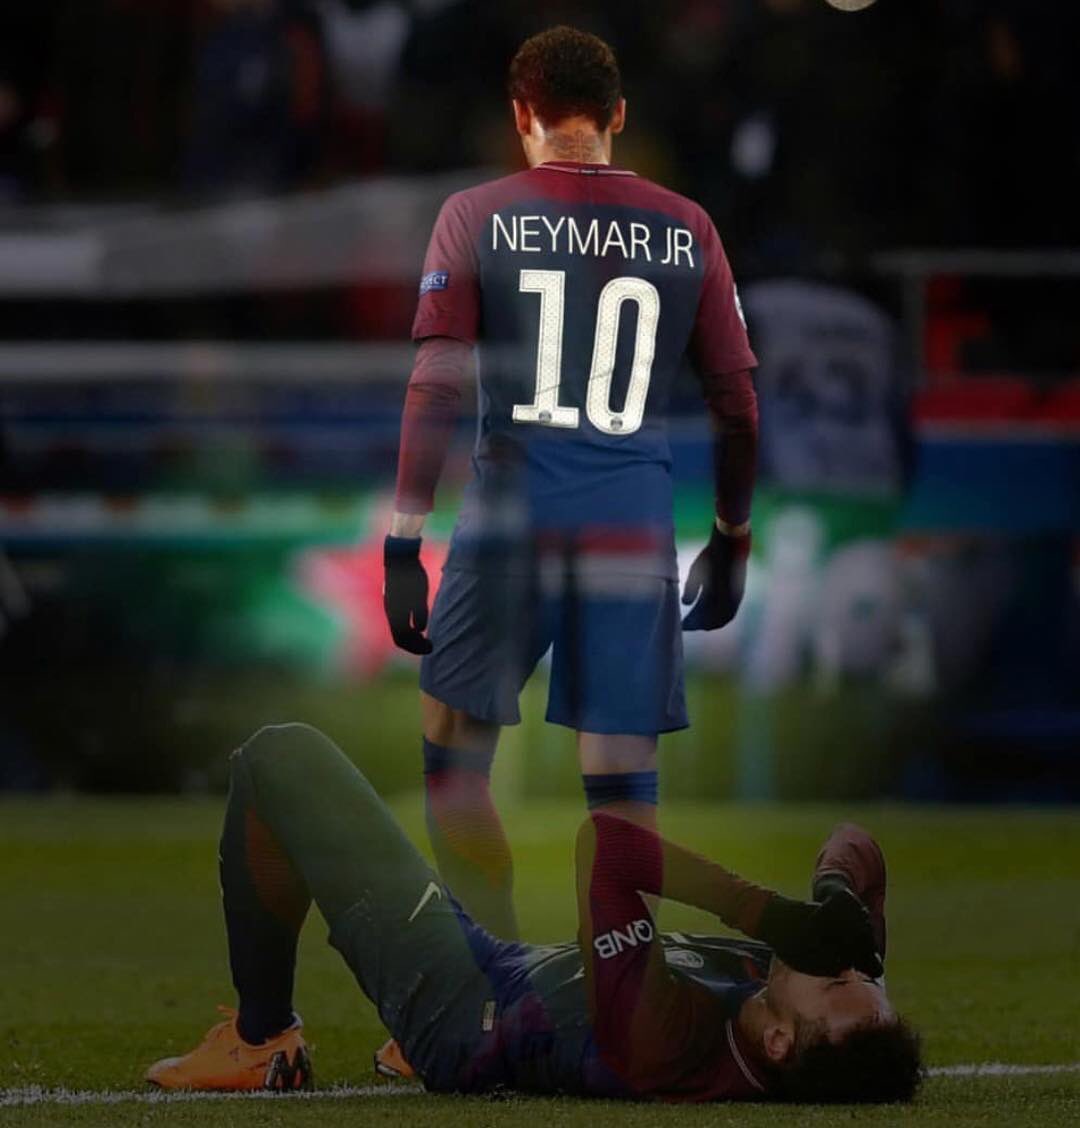 Neymar message on social networks after removal of PSG